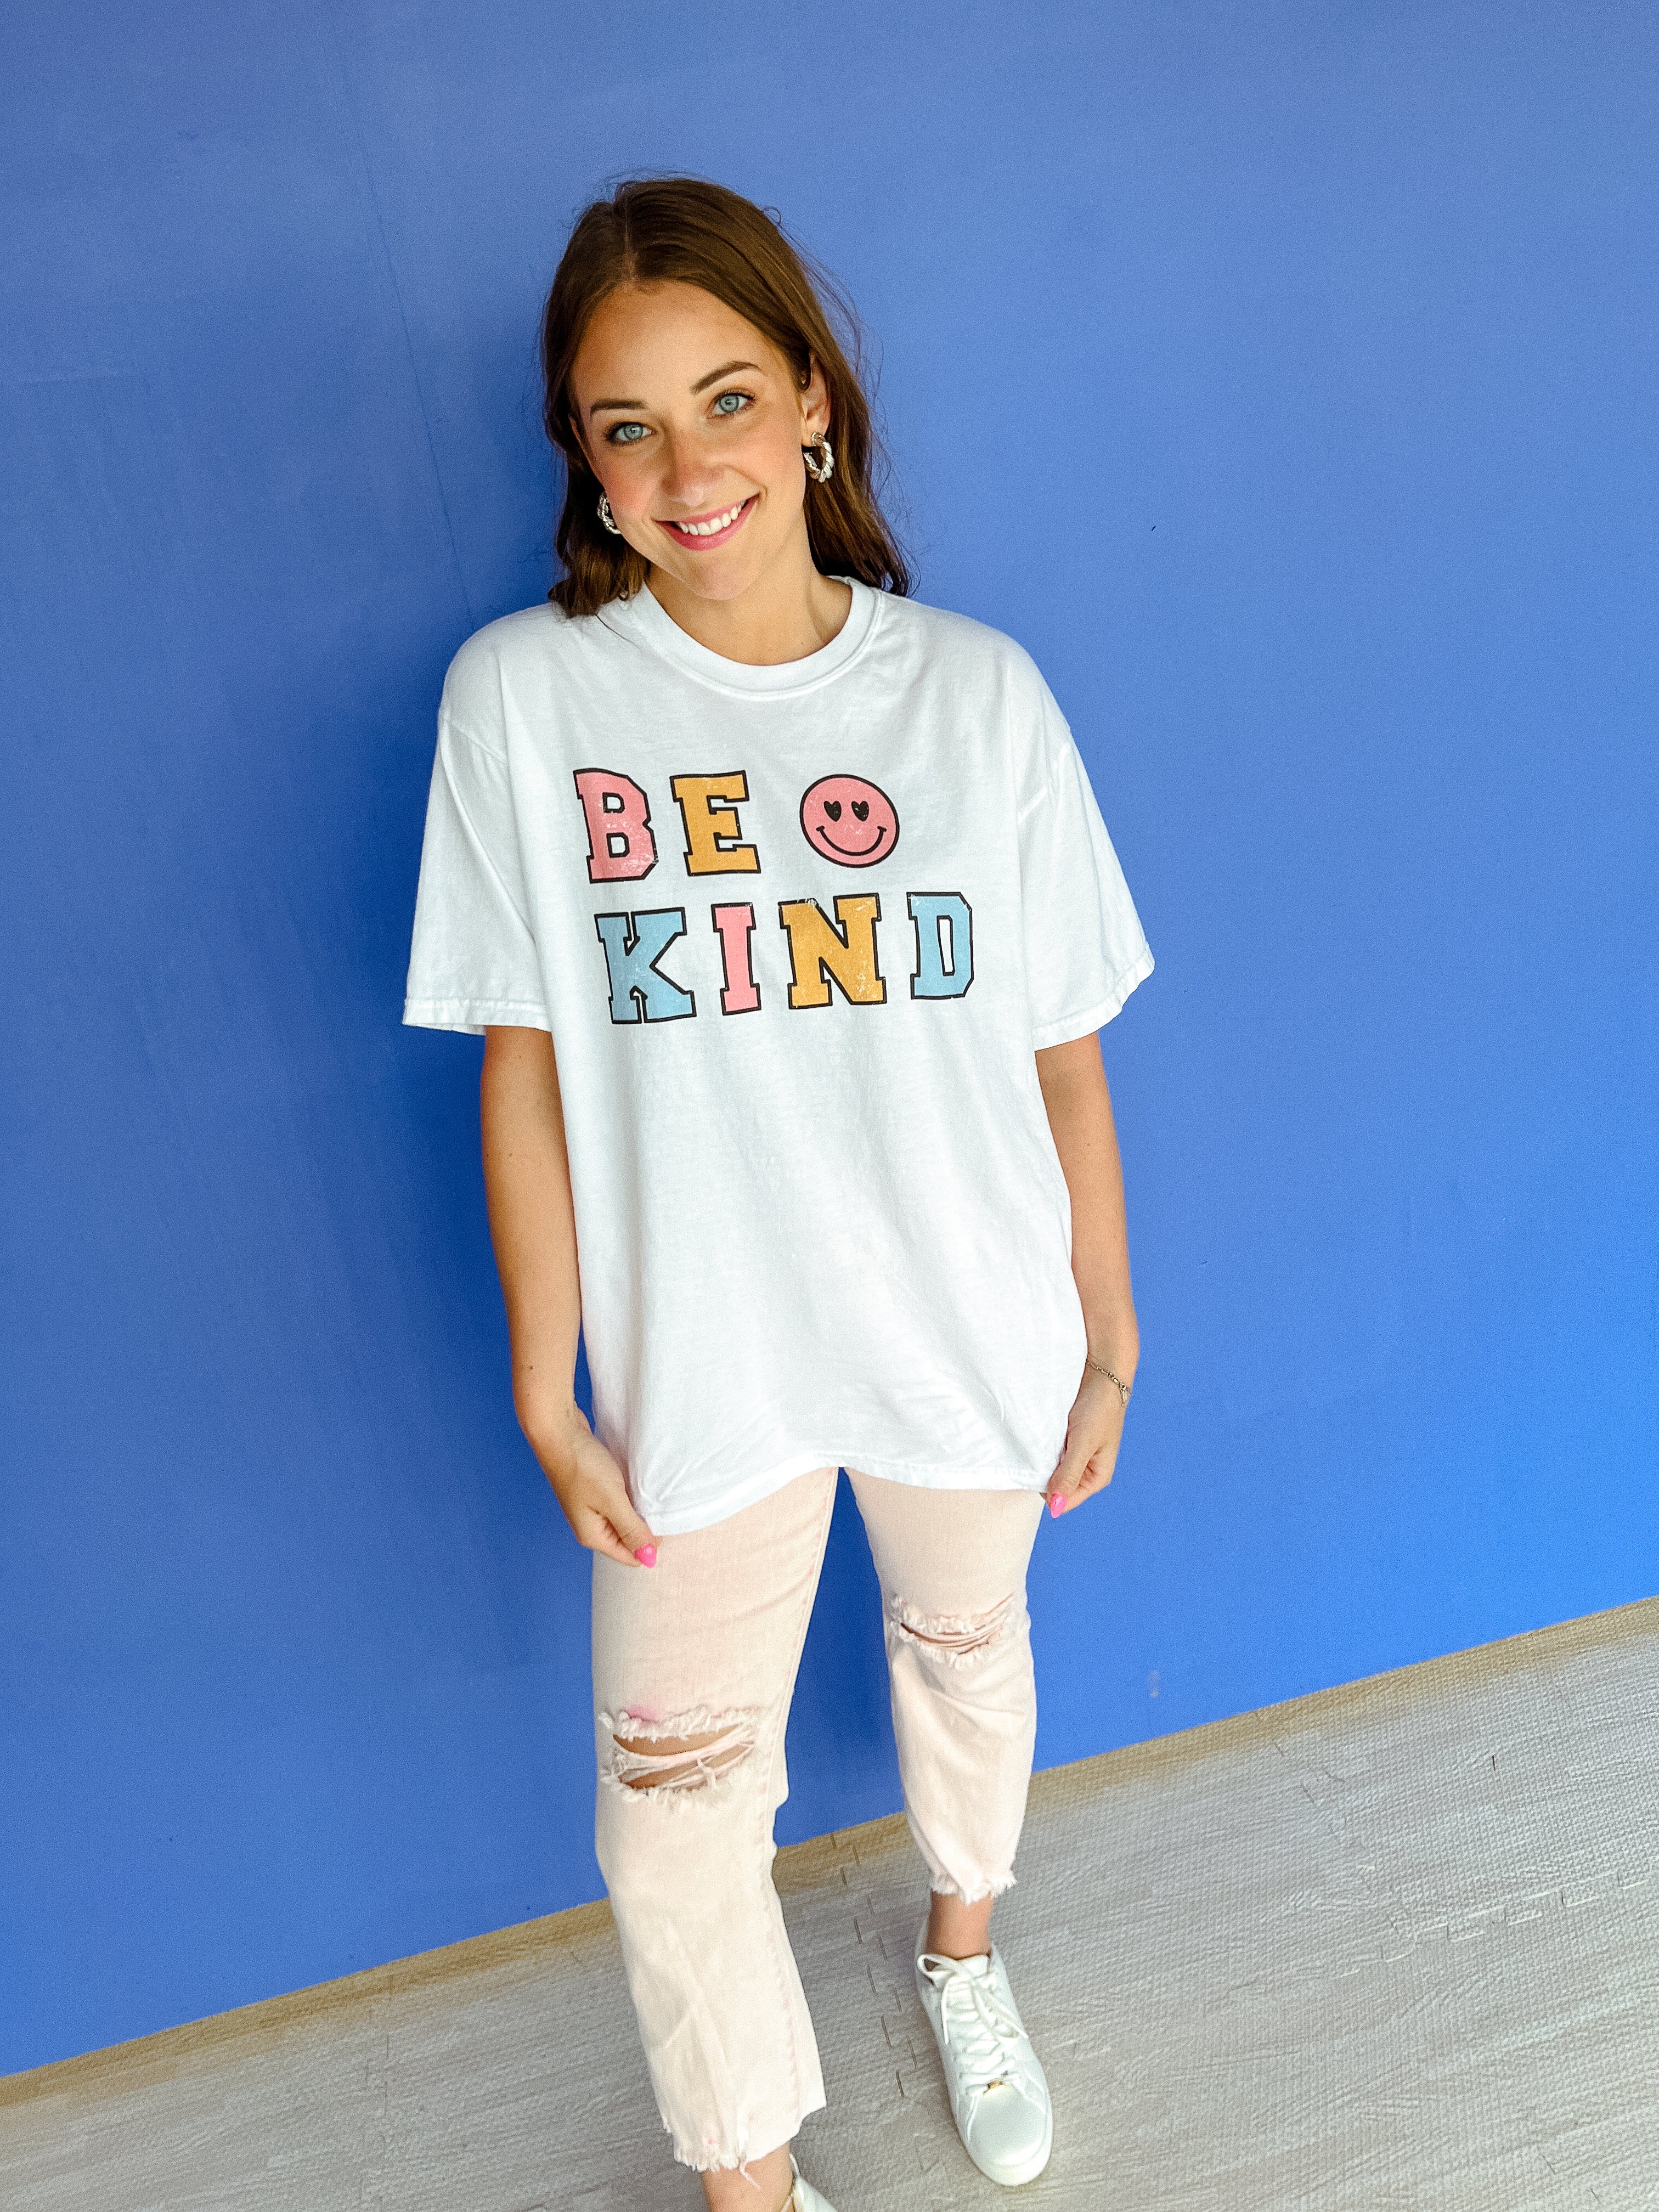 Smile, Be Happy Tee - Cool White